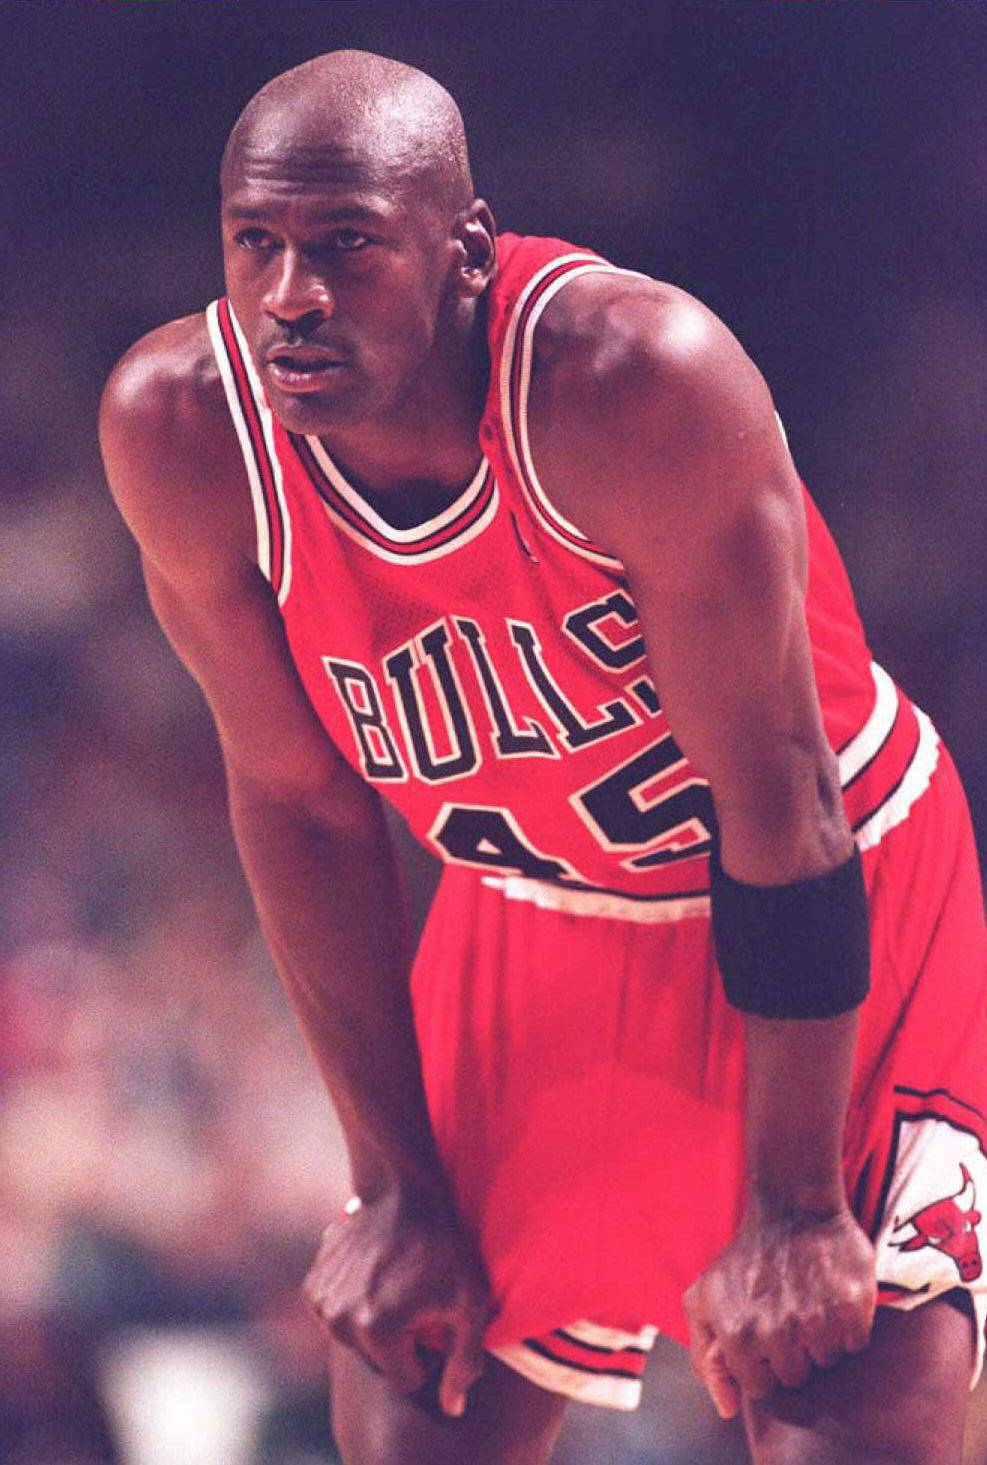 Why did Michael Jordan Wear the No. 45 Jersey For the Chicago